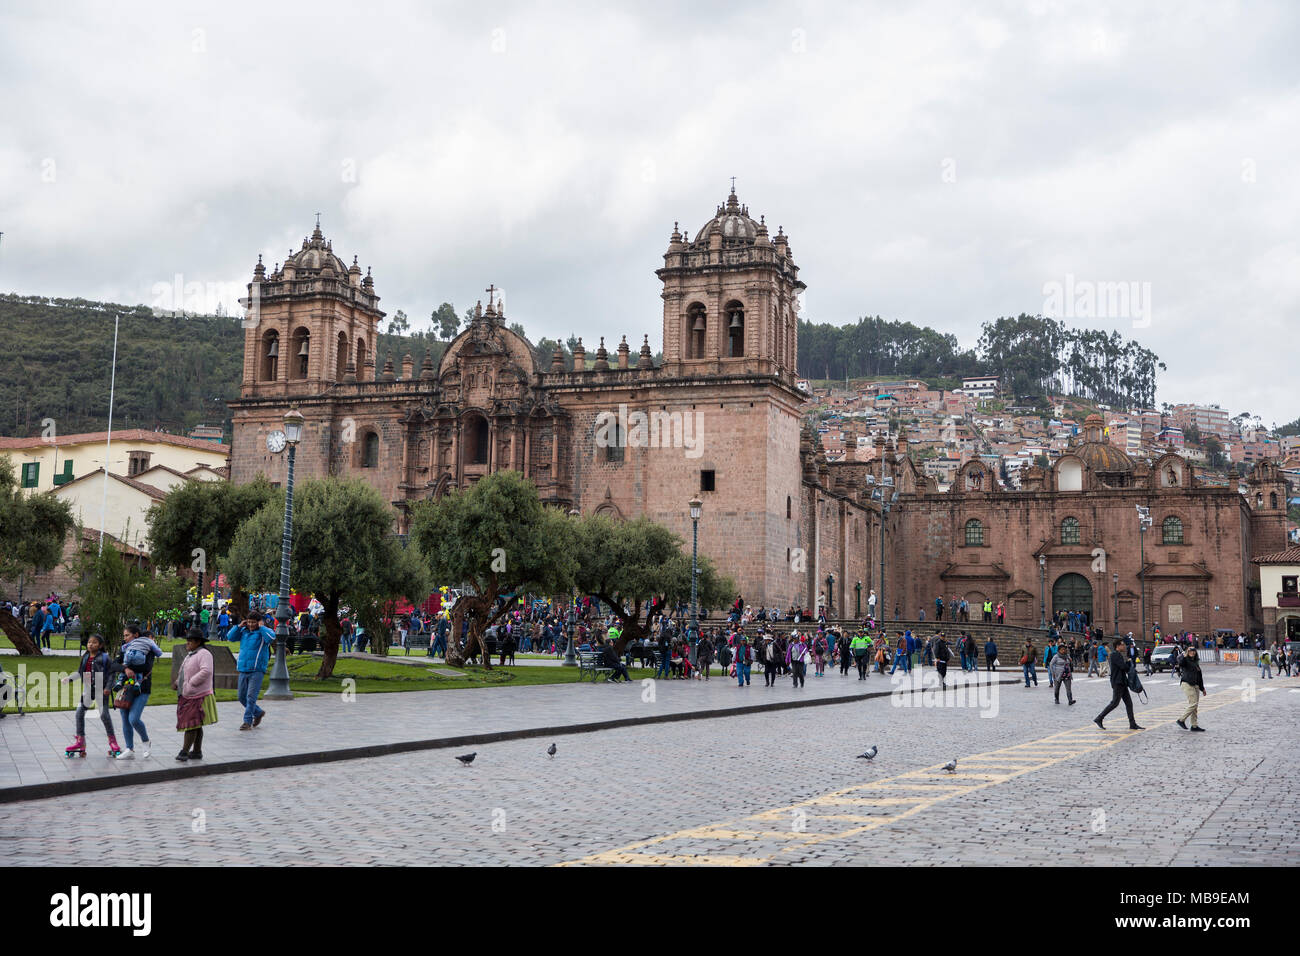 CUSCO, PERU - DECEMBER 31, 2017: Unidentified people on the street of Cusco, Peru. the Entire city of Cusco was designated a UNESCO World Heritage Sit Stock Photo